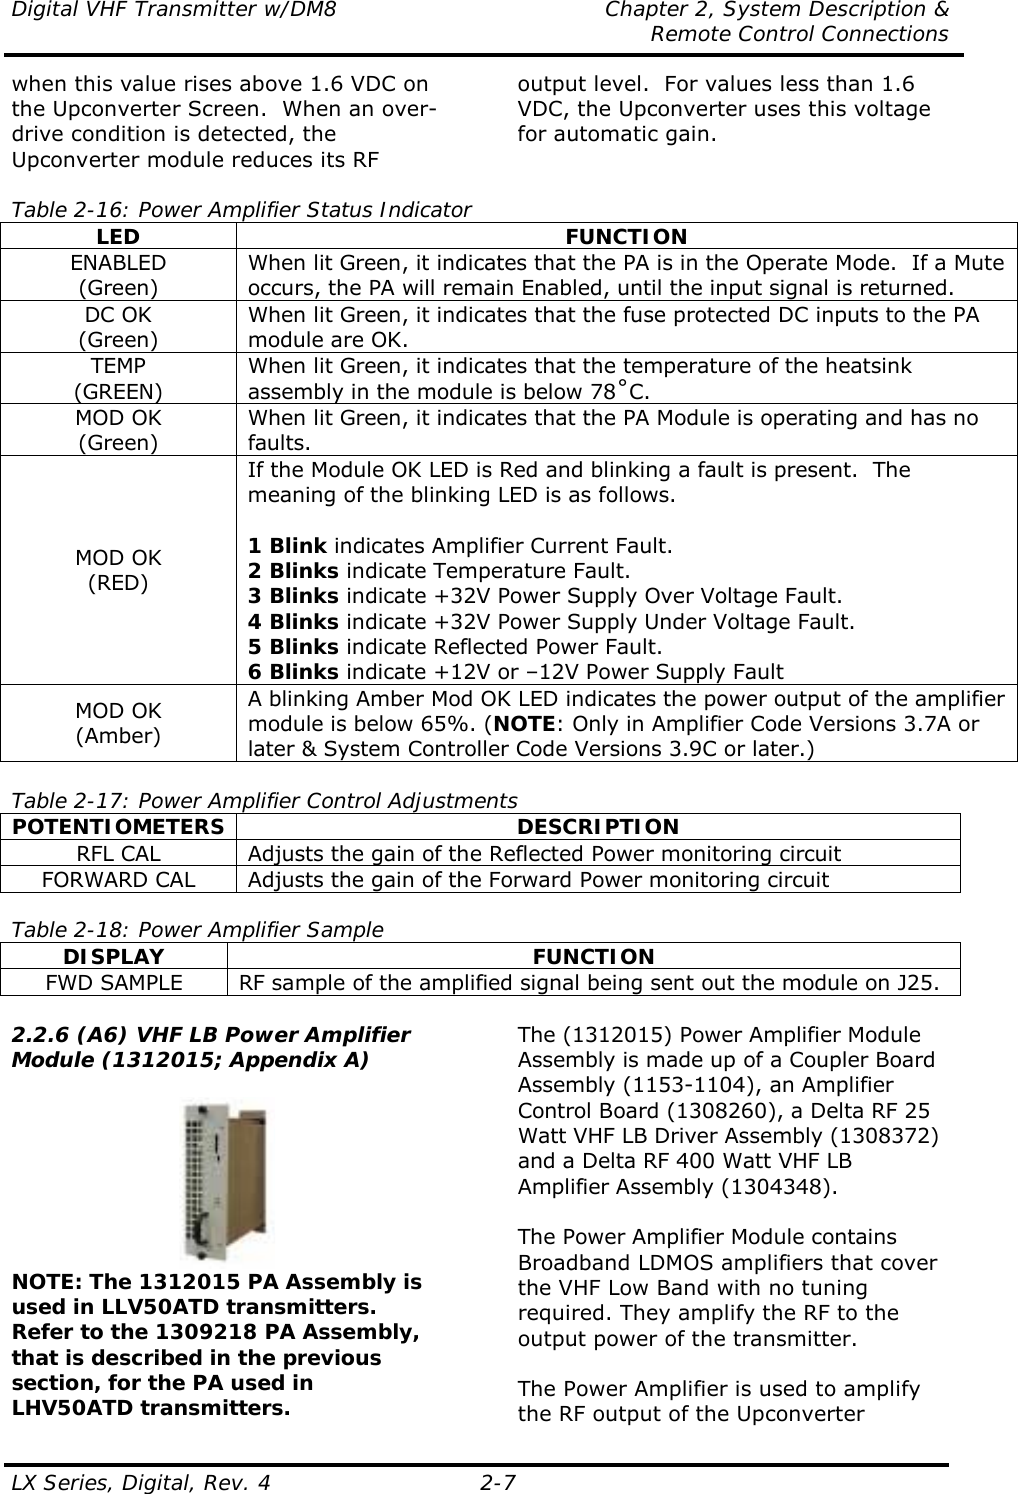 Digital VHF Transmitter w/DM8  Chapter 2, System Description &amp;   Remote Control Connections LX Series, Digital, Rev. 4    2-7 when this value rises above 1.6 VDC on the Upconverter Screen.  When an over-drive condition is detected, the Upconverter module reduces its RF output level.  For values less than 1.6 VDC, the Upconverter uses this voltage for automatic gain.   Table 2-16: Power Amplifier Status Indicator LED FUNCTION ENABLED (Green) When lit Green, it indicates that the PA is in the Operate Mode.  If a Mute occurs, the PA will remain Enabled, until the input signal is returned. DC OK (Green) When lit Green, it indicates that the fuse protected DC inputs to the PA module are OK. TEMP (GREEN) When lit Green, it indicates that the temperature of the heatsink assembly in the module is below 78ûC. MOD OK (Green) When lit Green, it indicates that the PA Module is operating and has no faults. MOD OK (RED) If the Module OK LED is Red and blinking a fault is present.  The meaning of the blinking LED is as follows.  1 Blink indicates Amplifier Current Fault. 2 Blinks indicate Temperature Fault. 3 Blinks indicate +32V Power Supply Over Voltage Fault. 4 Blinks indicate +32V Power Supply Under Voltage Fault. 5 Blinks indicate Reflected Power Fault. 6 Blinks indicate +12V or –12V Power Supply Fault MOD OK (Amber) A blinking Amber Mod OK LED indicates the power output of the amplifier module is below 65%. (NOTE: Only in Amplifier Code Versions 3.7A or later &amp; System Controller Code Versions 3.9C or later.)  Table 2-17: Power Amplifier Control Adjustments POTENTIOMETERS DESCRIPTION RFL CAL  Adjusts the gain of the Reflected Power monitoring circuit FORWARD CAL  Adjusts the gain of the Forward Power monitoring circuit  Table 2-18: Power Amplifier Sample DISPLAY FUNCTION FWD SAMPLE  RF sample of the amplified signal being sent out the module on J25.  2.2.6 (A6) VHF LB Power Amplifier Module (1312015; Appendix A)   NOTE: The 1312015 PA Assembly is used in LLV50ATD transmitters.  Refer to the 1309218 PA Assembly, that is described in the previous section, for the PA used in LHV50ATD transmitters. The (1312015) Power Amplifier Module Assembly is made up of a Coupler Board Assembly (1153-1104), an Amplifier Control Board (1308260), a Delta RF 25 Watt VHF LB Driver Assembly (1308372) and a Delta RF 400 Watt VHF LB Amplifier Assembly (1304348).  The Power Amplifier Module contains Broadband LDMOS amplifiers that cover the VHF Low Band with no tuning required. They amplify the RF to the output power of the transmitter.  The Power Amplifier is used to amplify the RF output of the Upconverter 